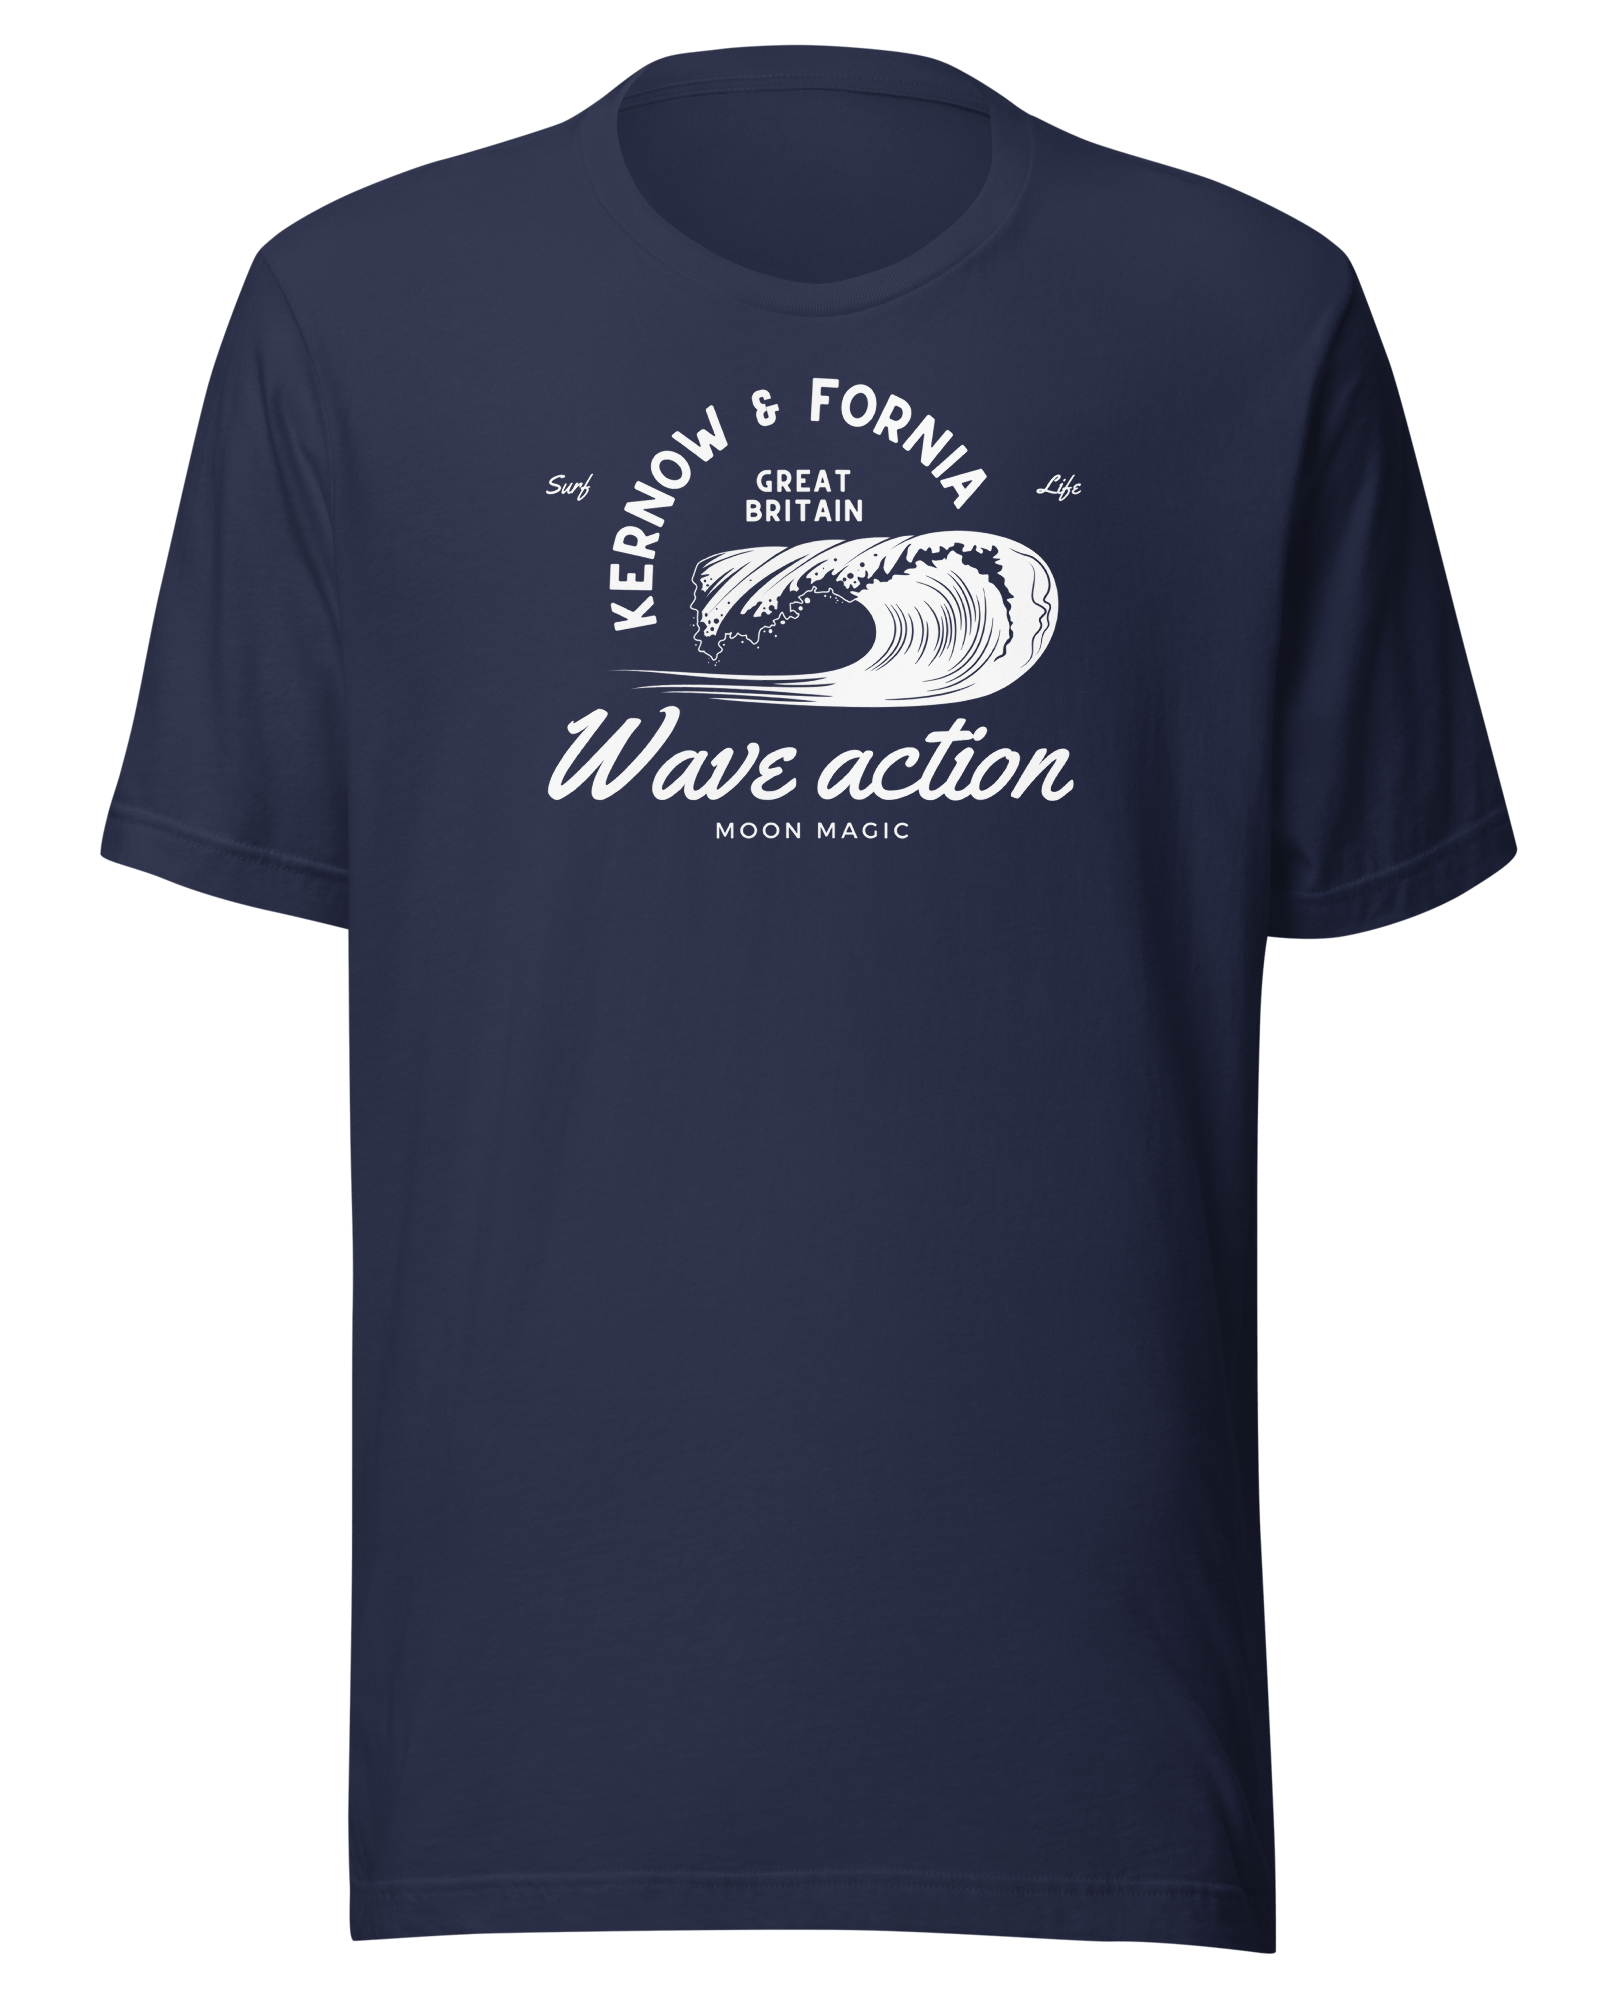 Kernow & Fornia Great Britain Wave Action T-shirt Navy / S Shirts & Tops Jolly & Goode